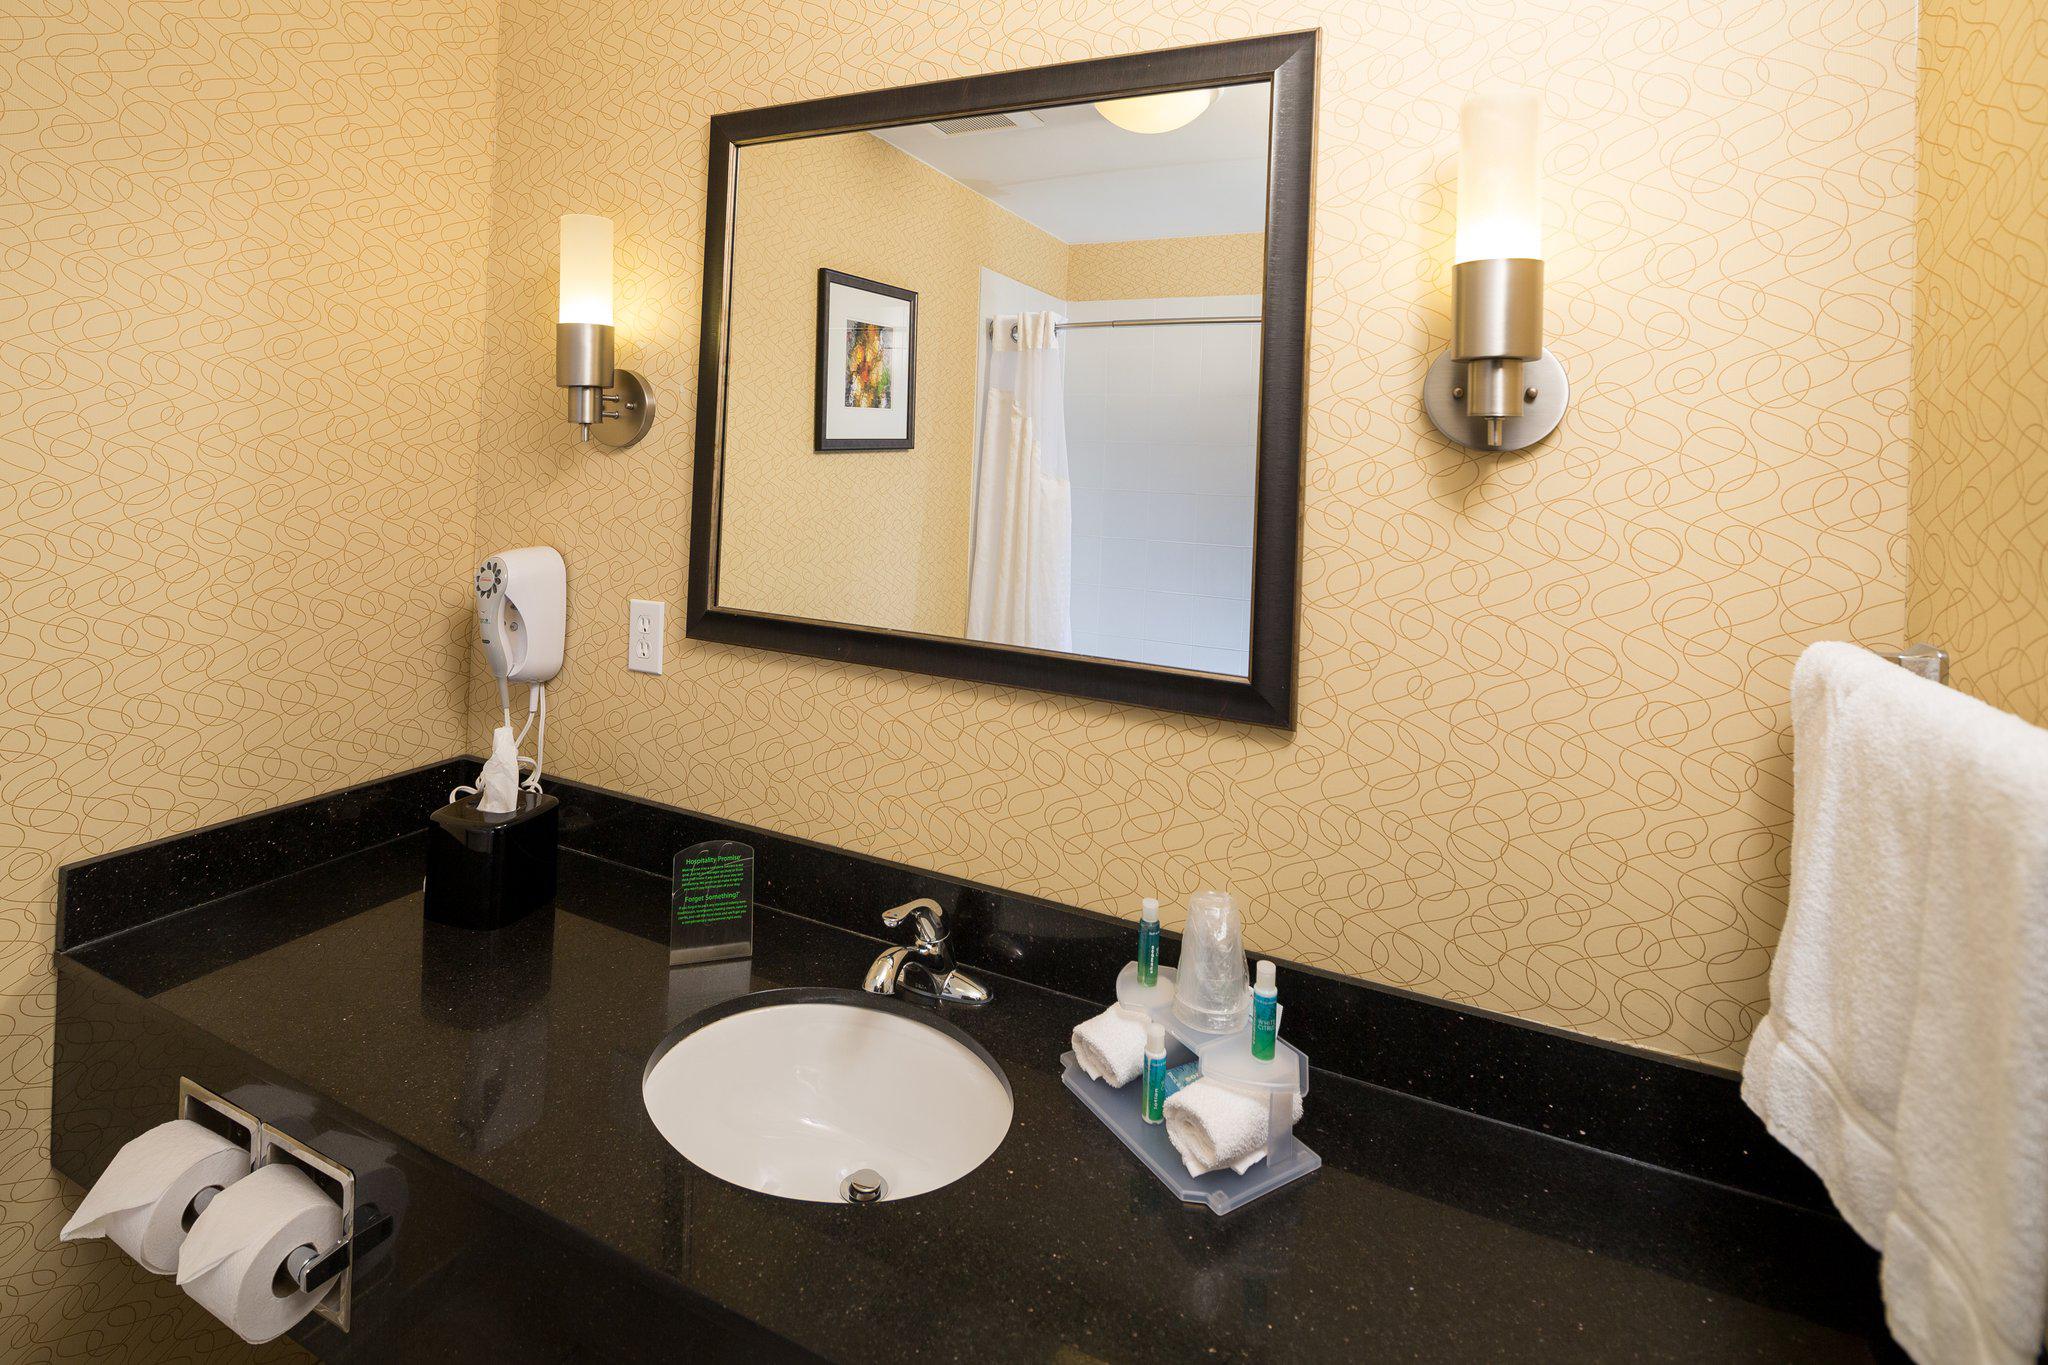 Holiday Inn Express & Suites Detroit North - Troy Photo